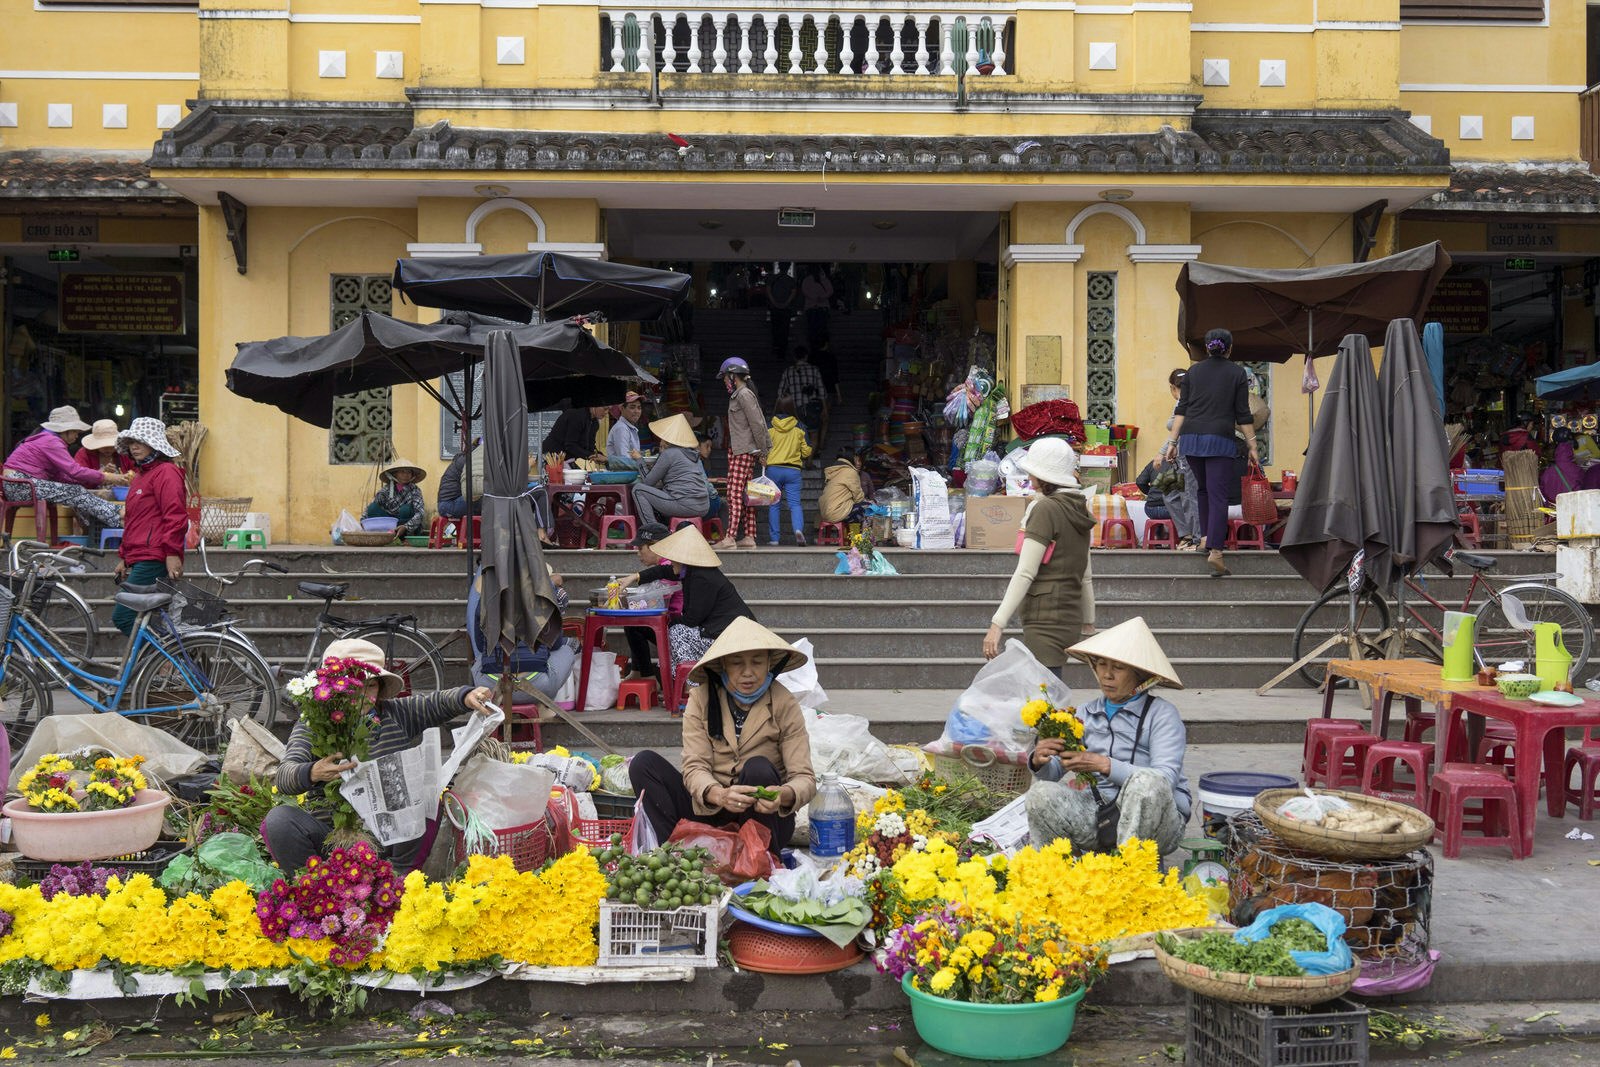 Flower vendors on the concrete steps outside Hoi An central market. The women, wearing conical hats, are selling yellow and pink blooms; there are bikes and people in the background. 